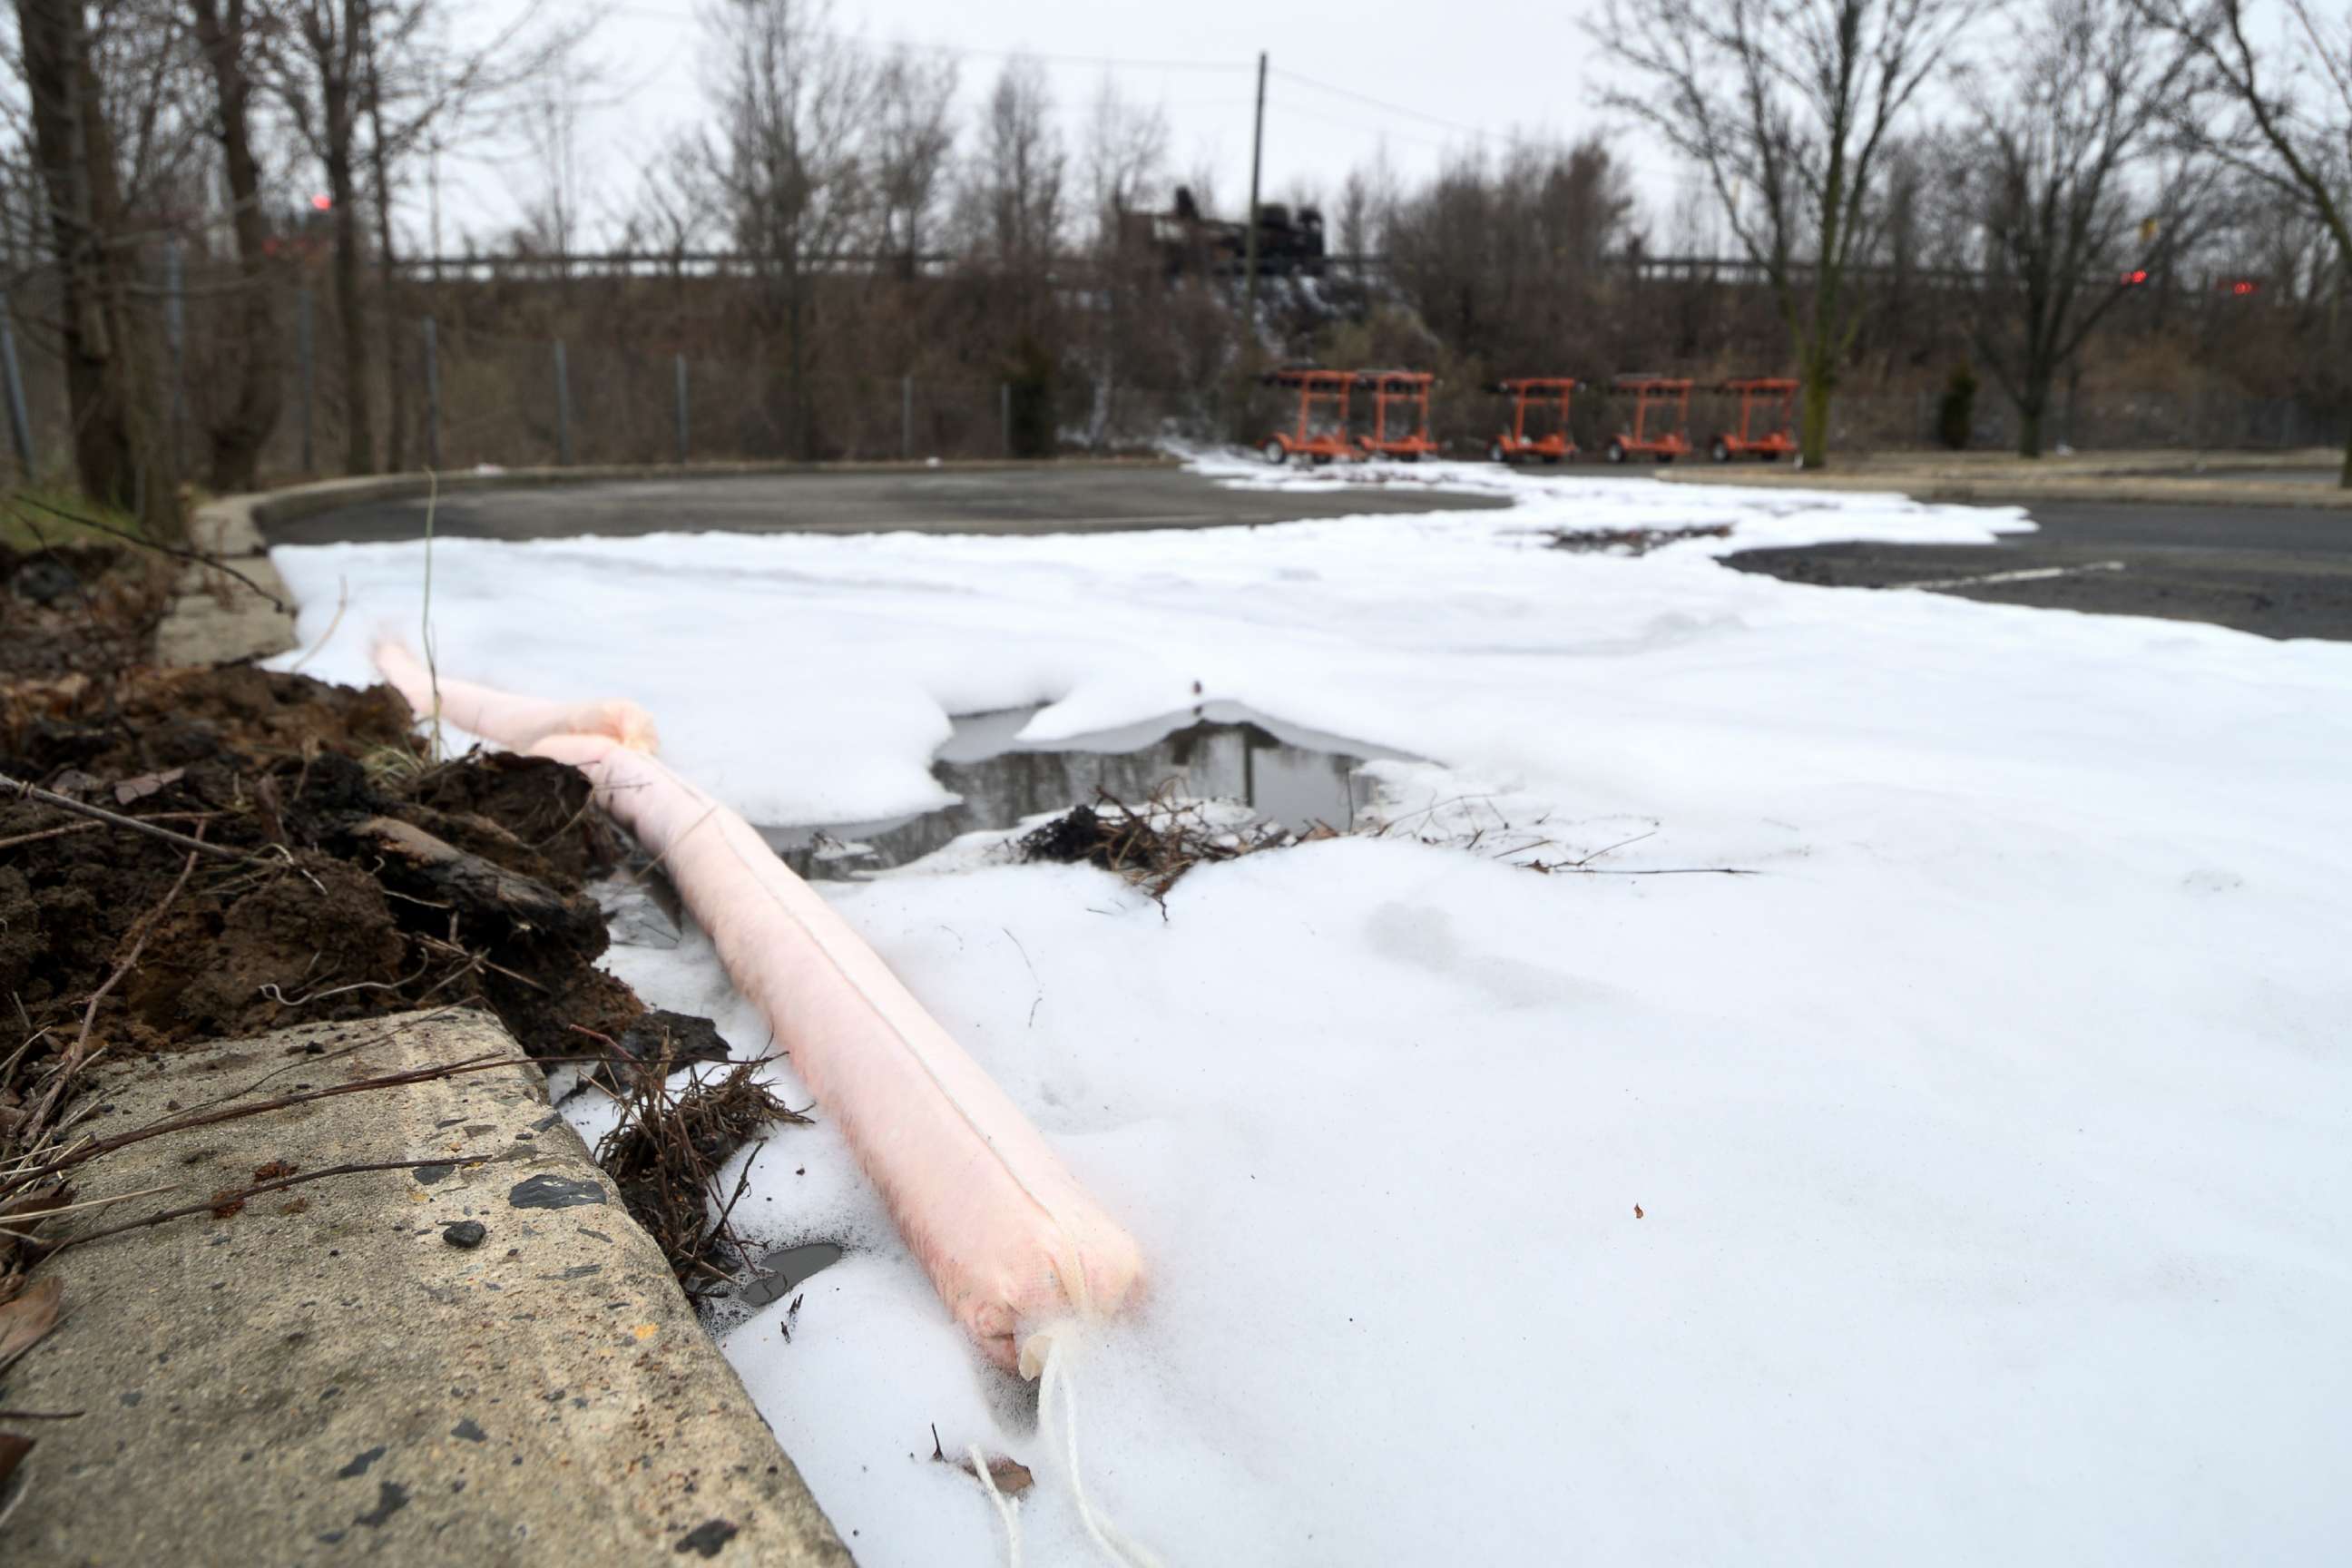 PHOTO: Absorbent booms are used to contain aqueous film forming foams (AFFF) from spilling into the surface water near a scene of a Class B fire of a tanker truck at an off ramp of the Interstate I-95, in Bensalem Township, Penn., Feb. 7, 2019.